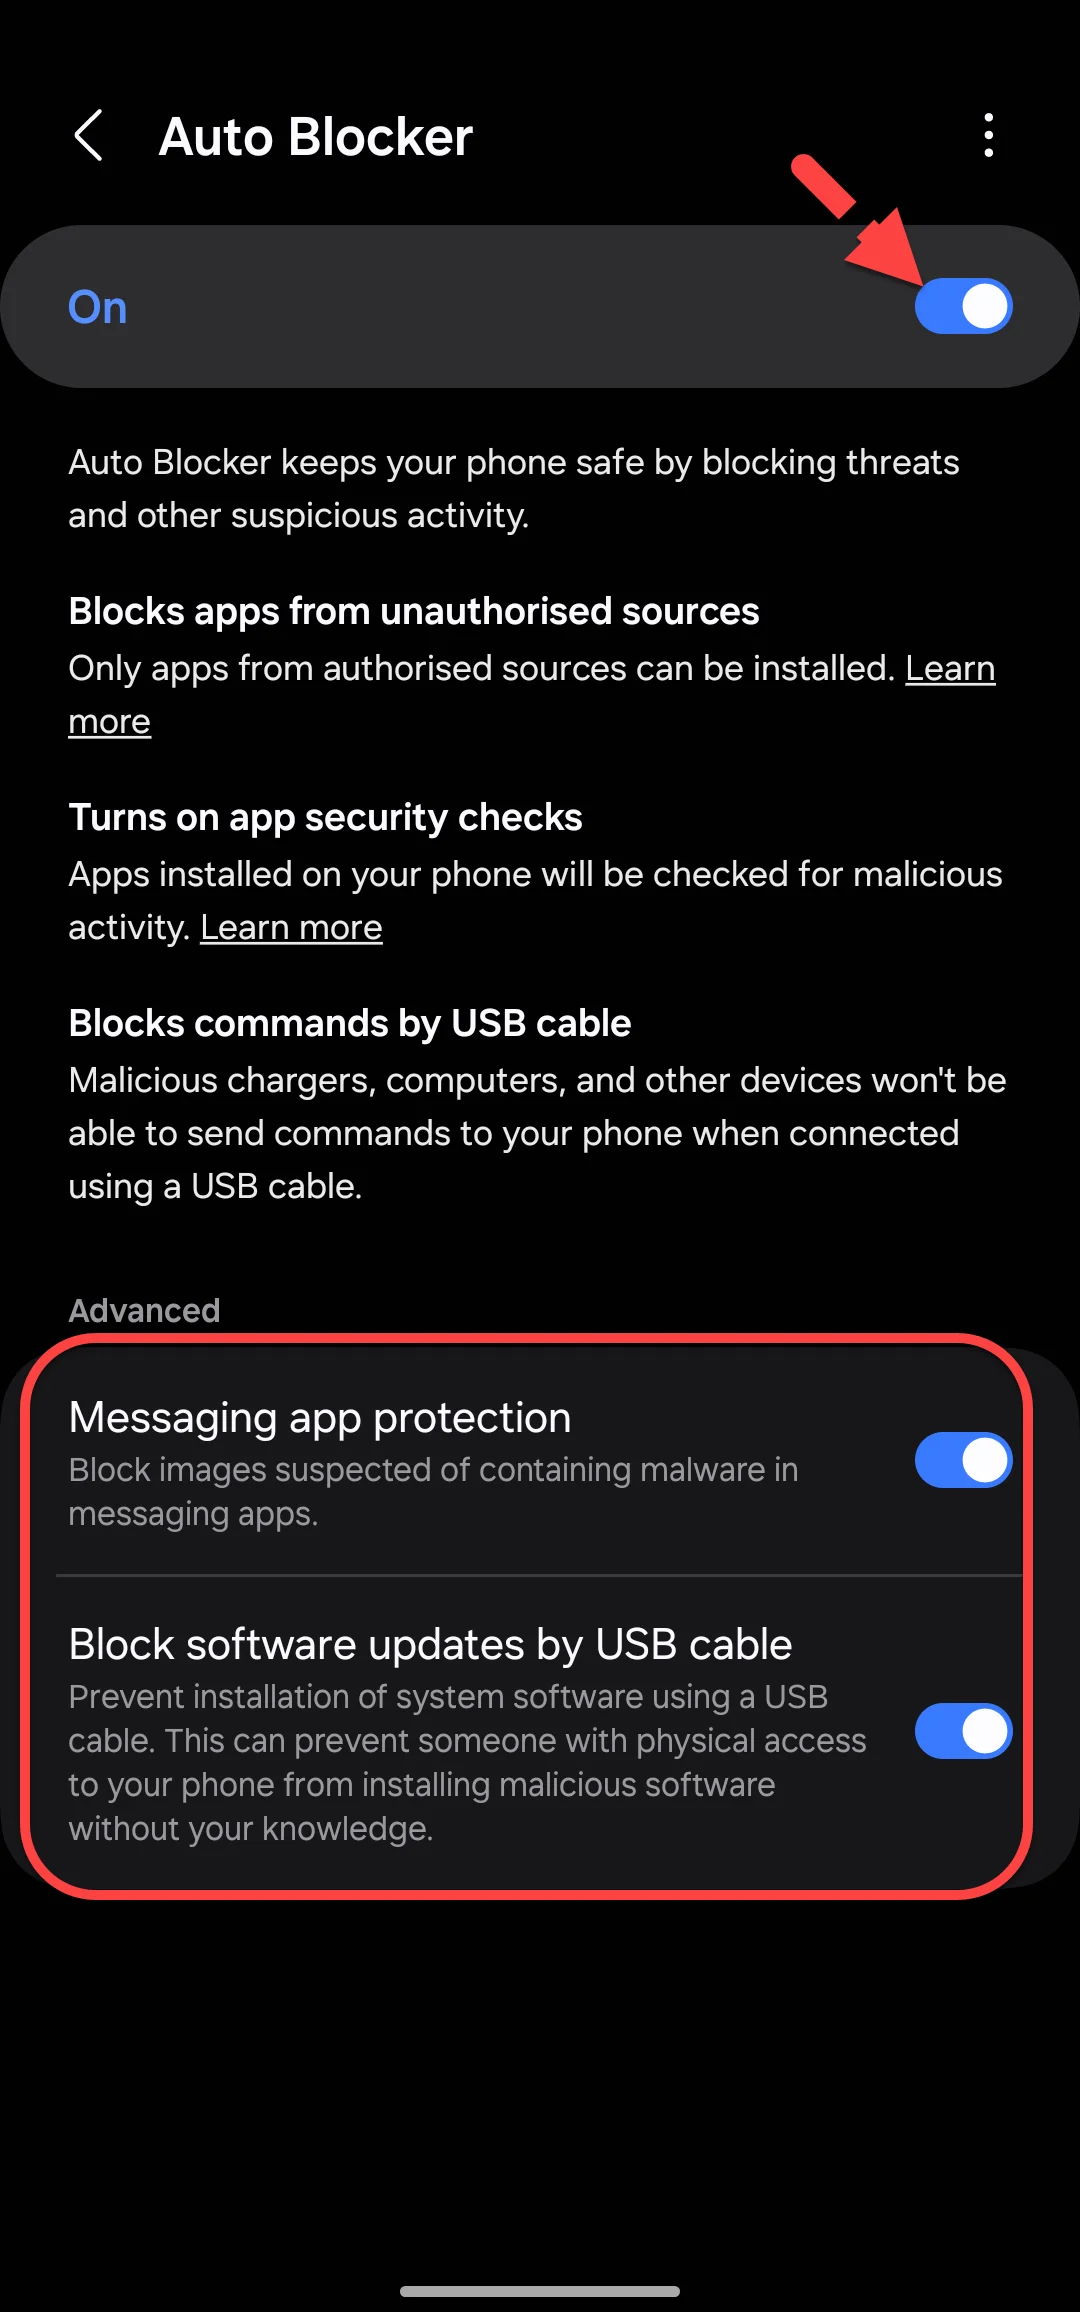 Auto Blocker One UI 6.0 Samsung: How to Enable it? (Android 14)